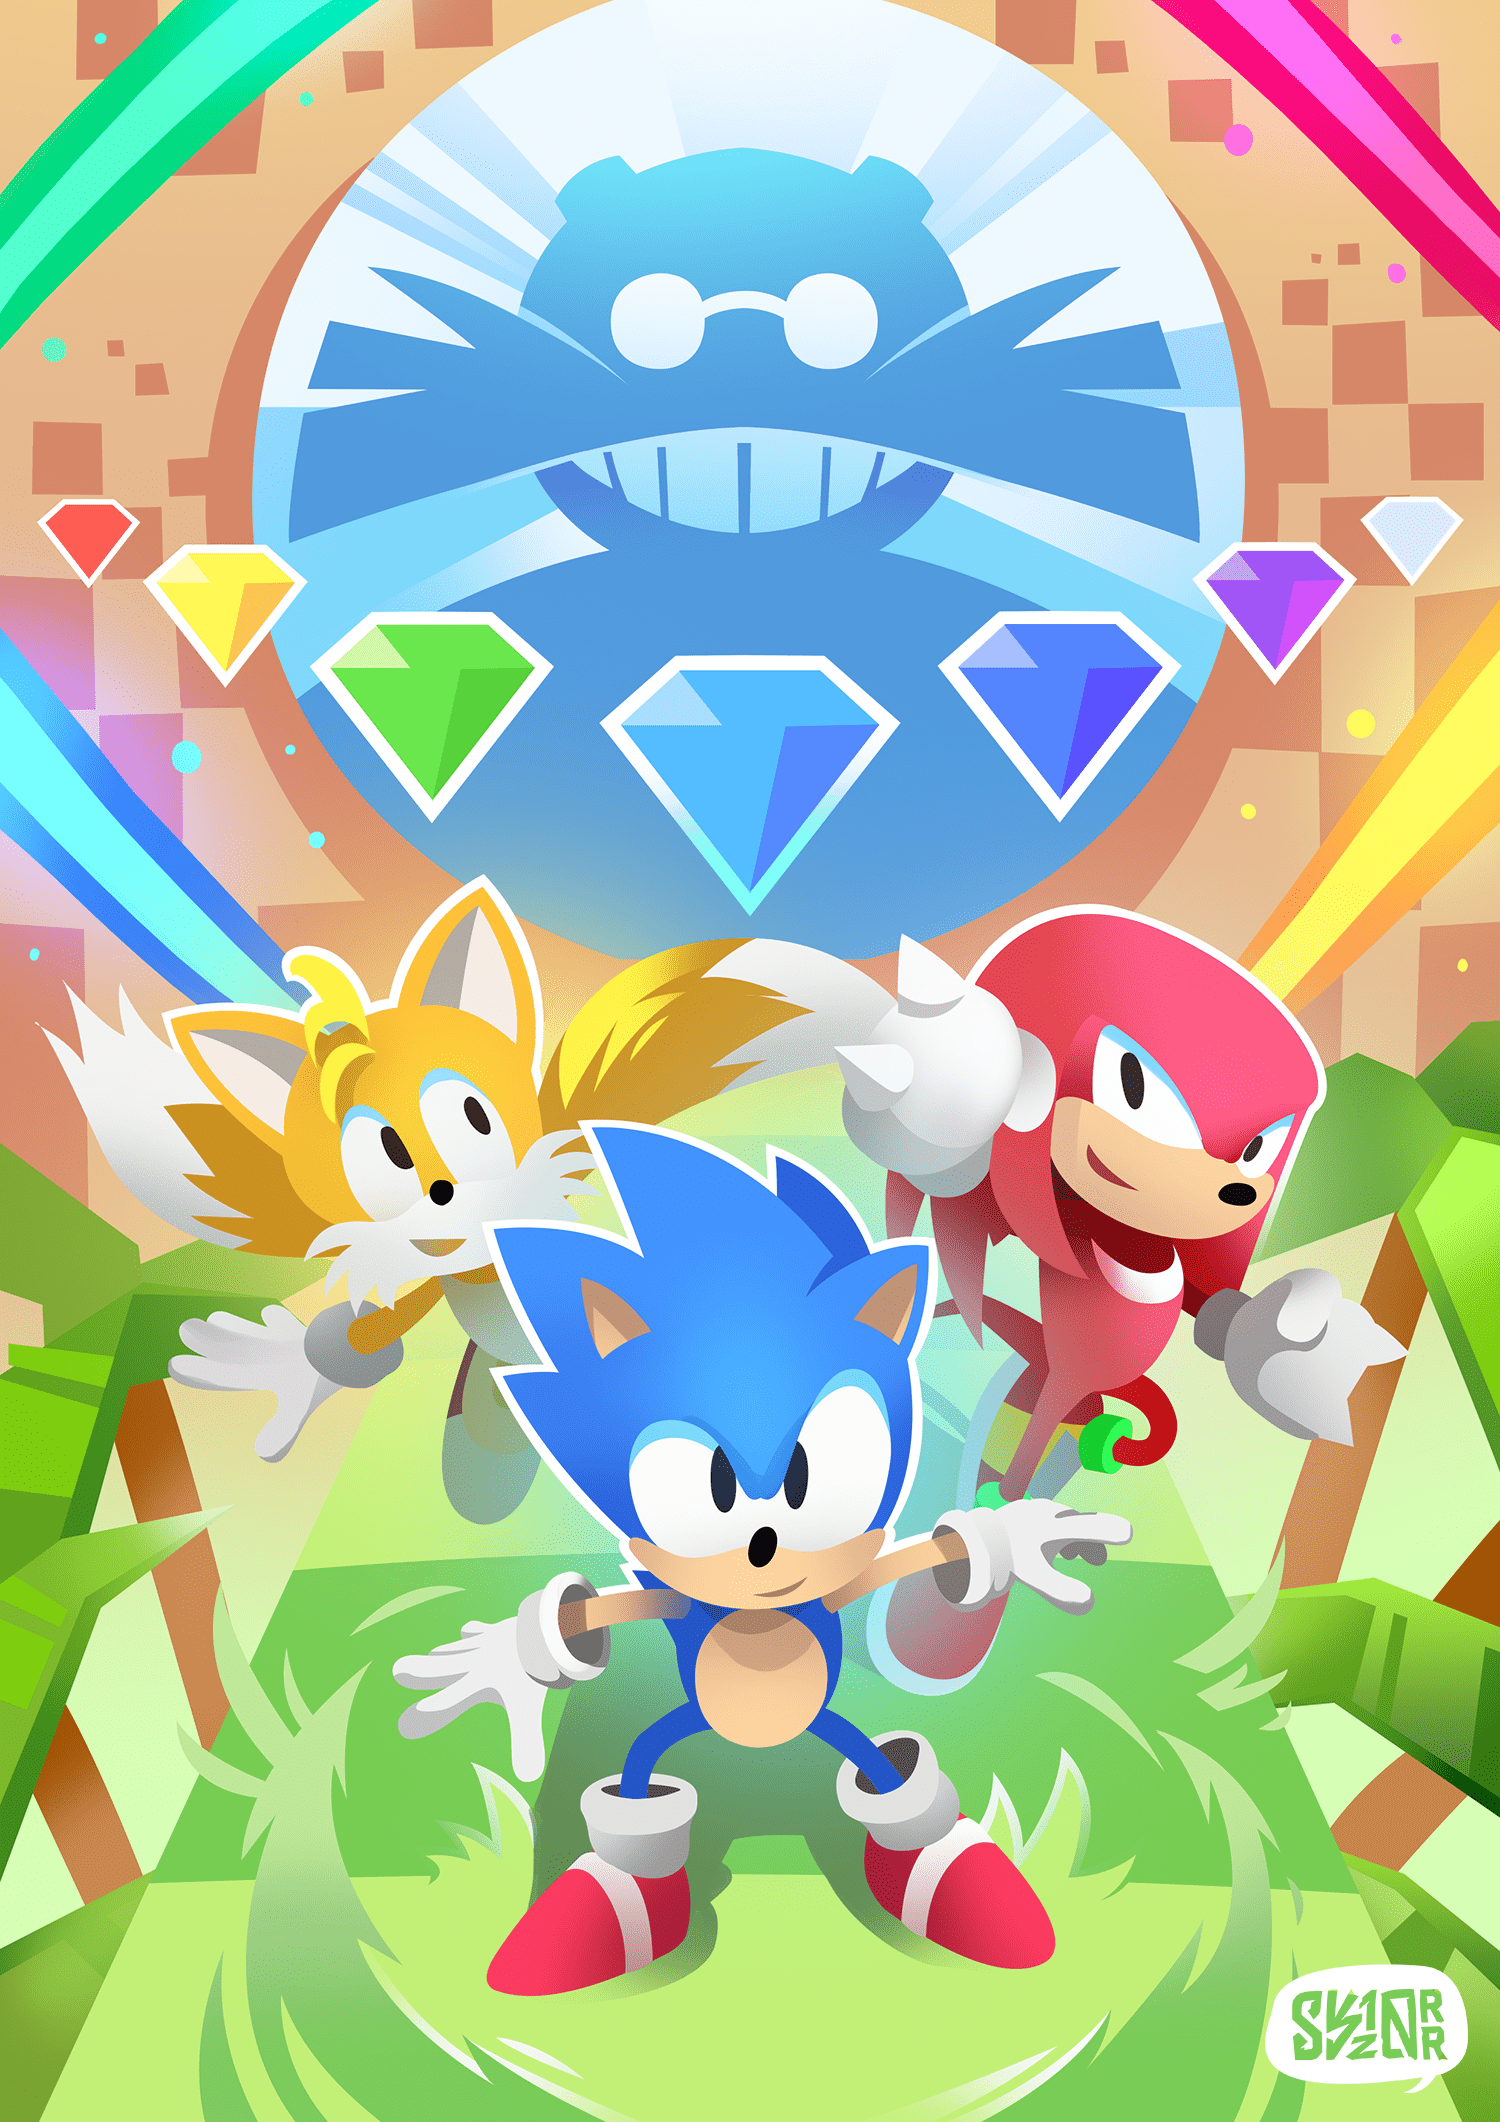 Sonic Phone Wallpapers Top Free Sonic Phone Backgrounds Wallpaperaccess